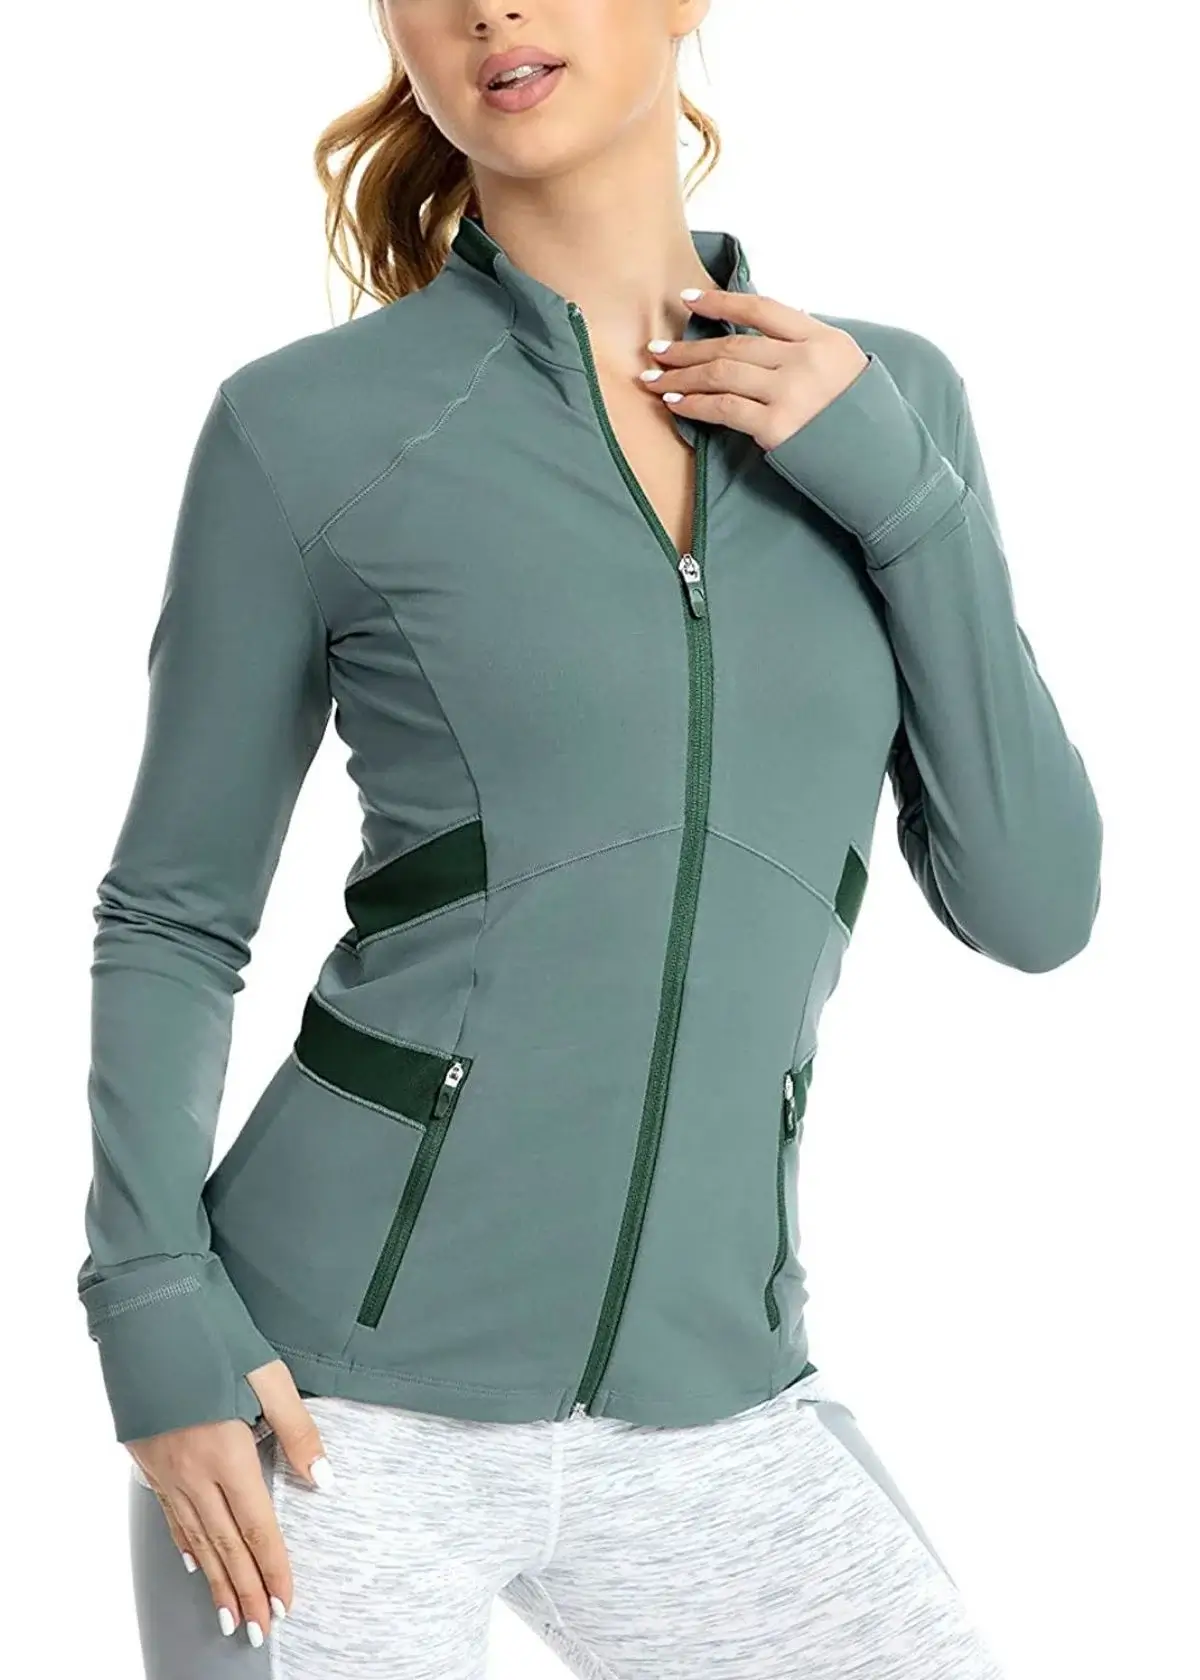 What is the Lululemon BBL Jacket?